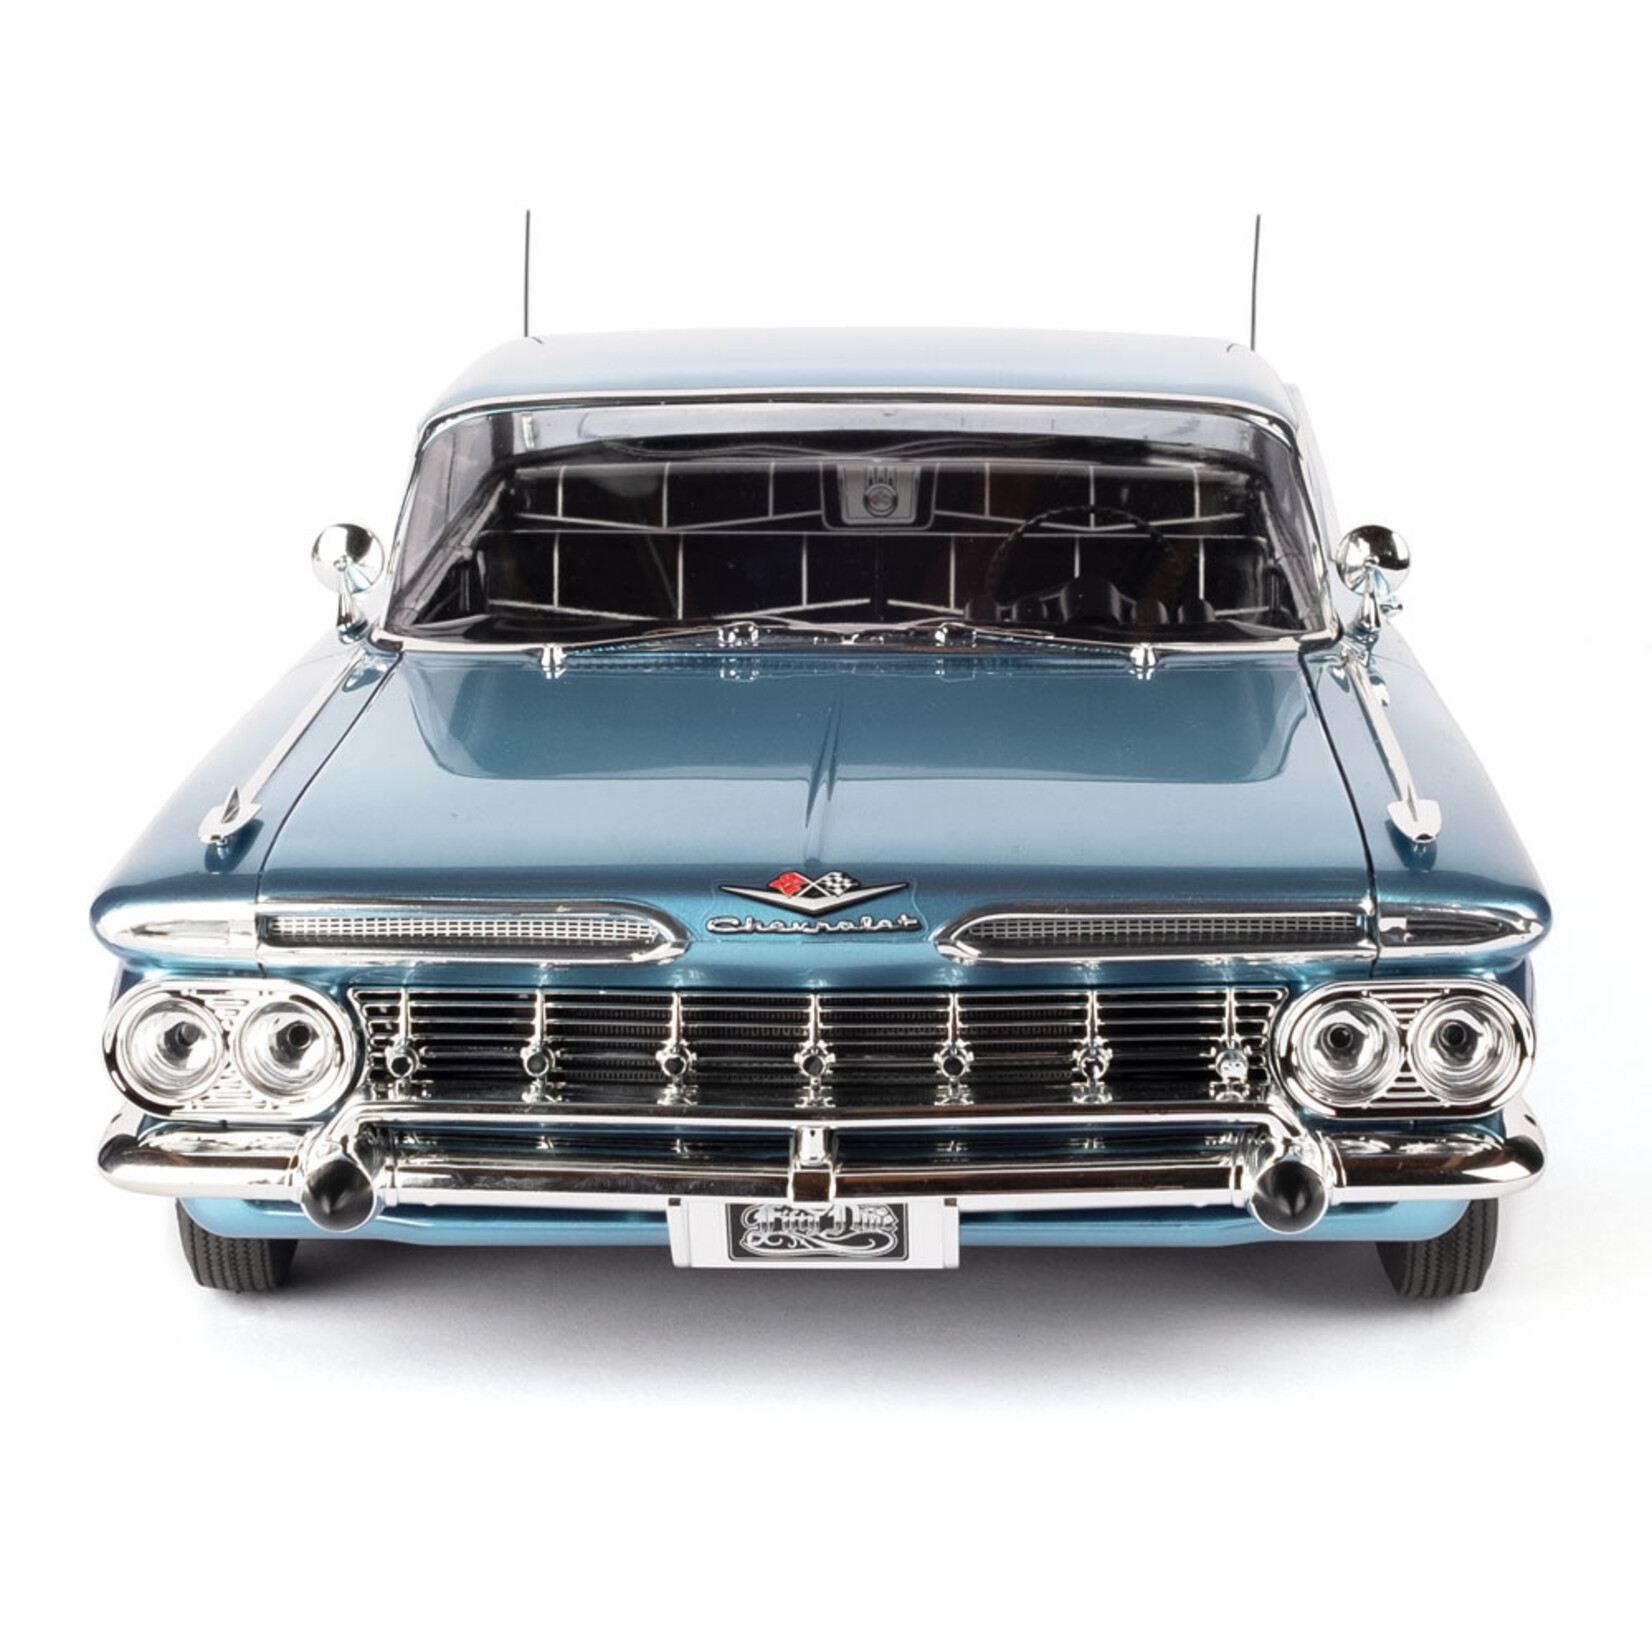 Redcat Racing Fiftynine 1:10 1959 Chevrolet Impala Hopping Lowrider